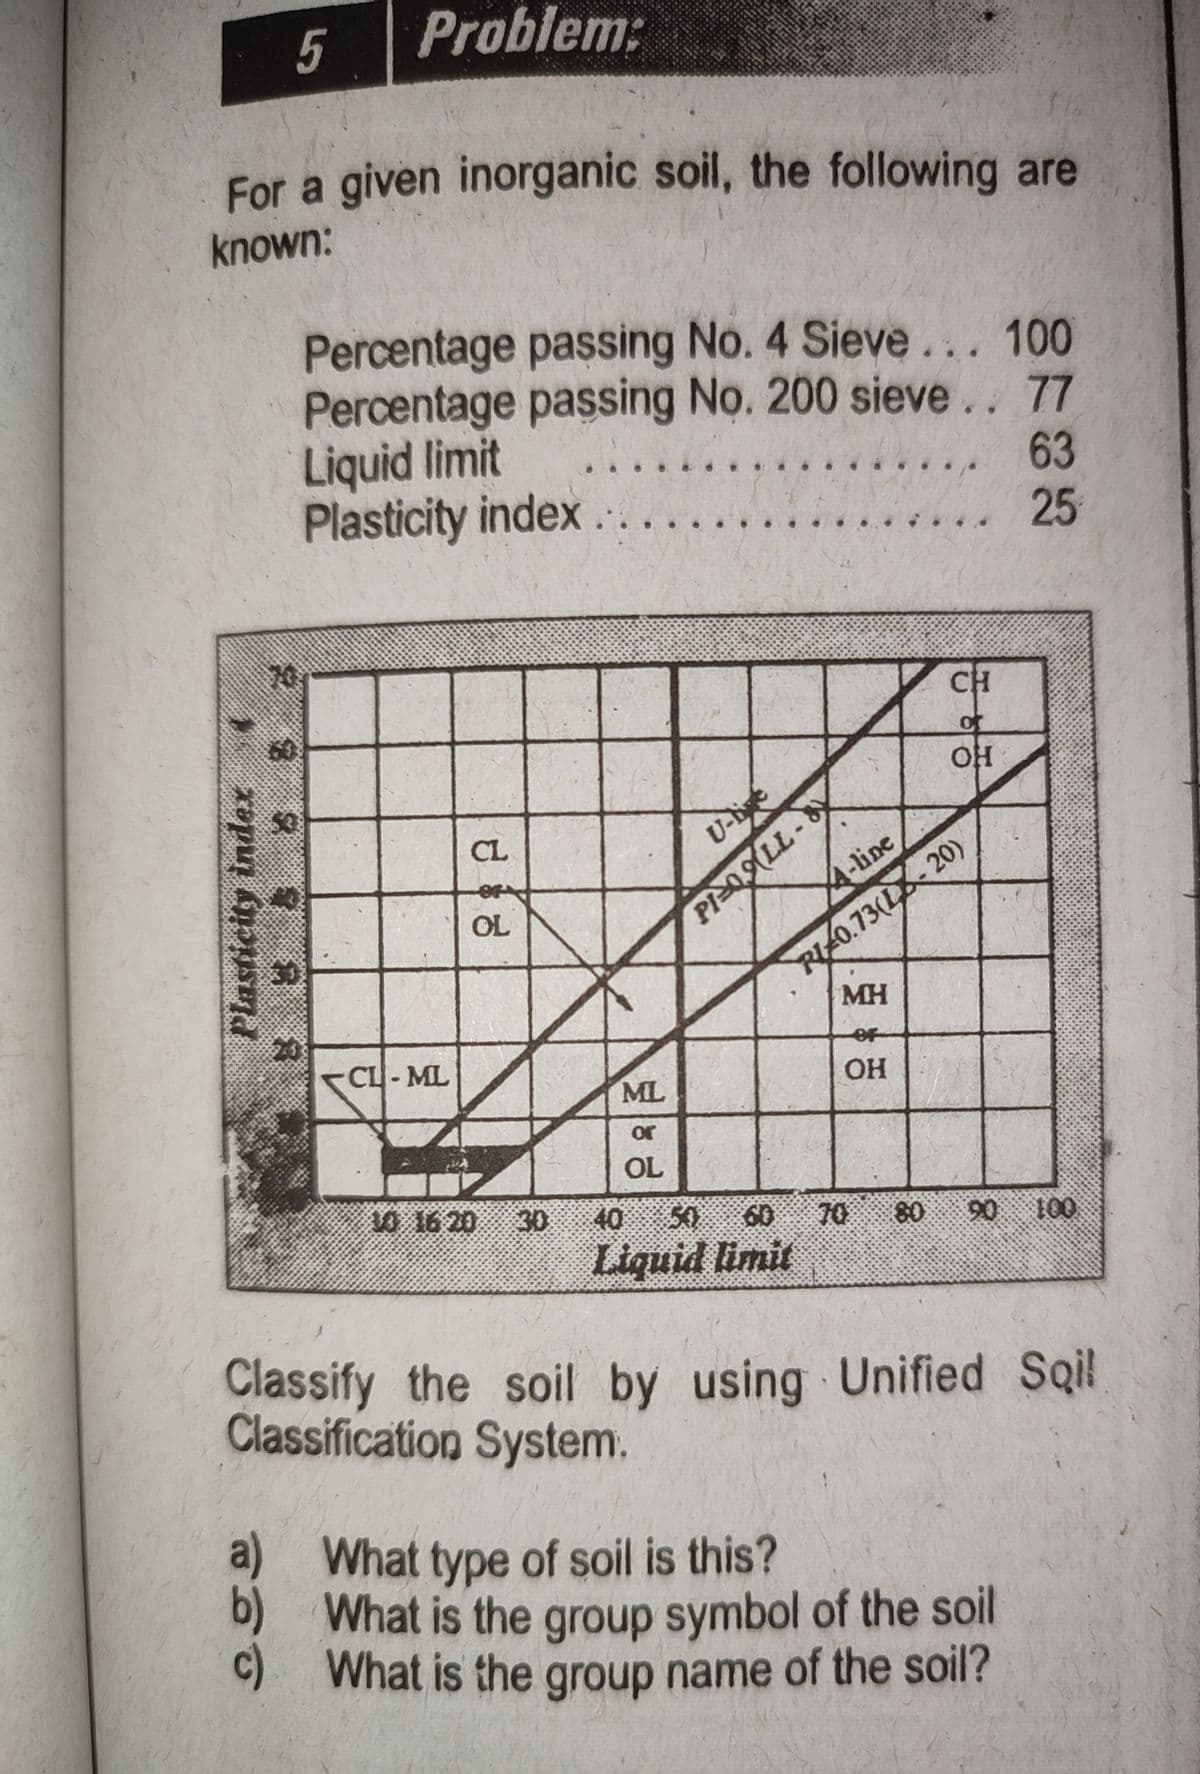 5
Problem:
For a given inorganic soil, the following are
known:
Percentage passing No. 4 Sieve... 100
Percentage passing No. 200 sieve.. 77
Liquid limit
Plasticity index....
......
63
25
70
CH
or
CL
U-b
RI40.73(L-20)
MH
-line
OL
PIOLL-
CL-ML
OF
ML
OH
or
OL
10 16 20
30
40
50
60
70 80
90
100
Liquid limit
Classify the soil by using Unified Sqil
Classification System.
a) What type of soil is this?
b) What is the group symbol of the soil
C) What is the group name of the soil?
